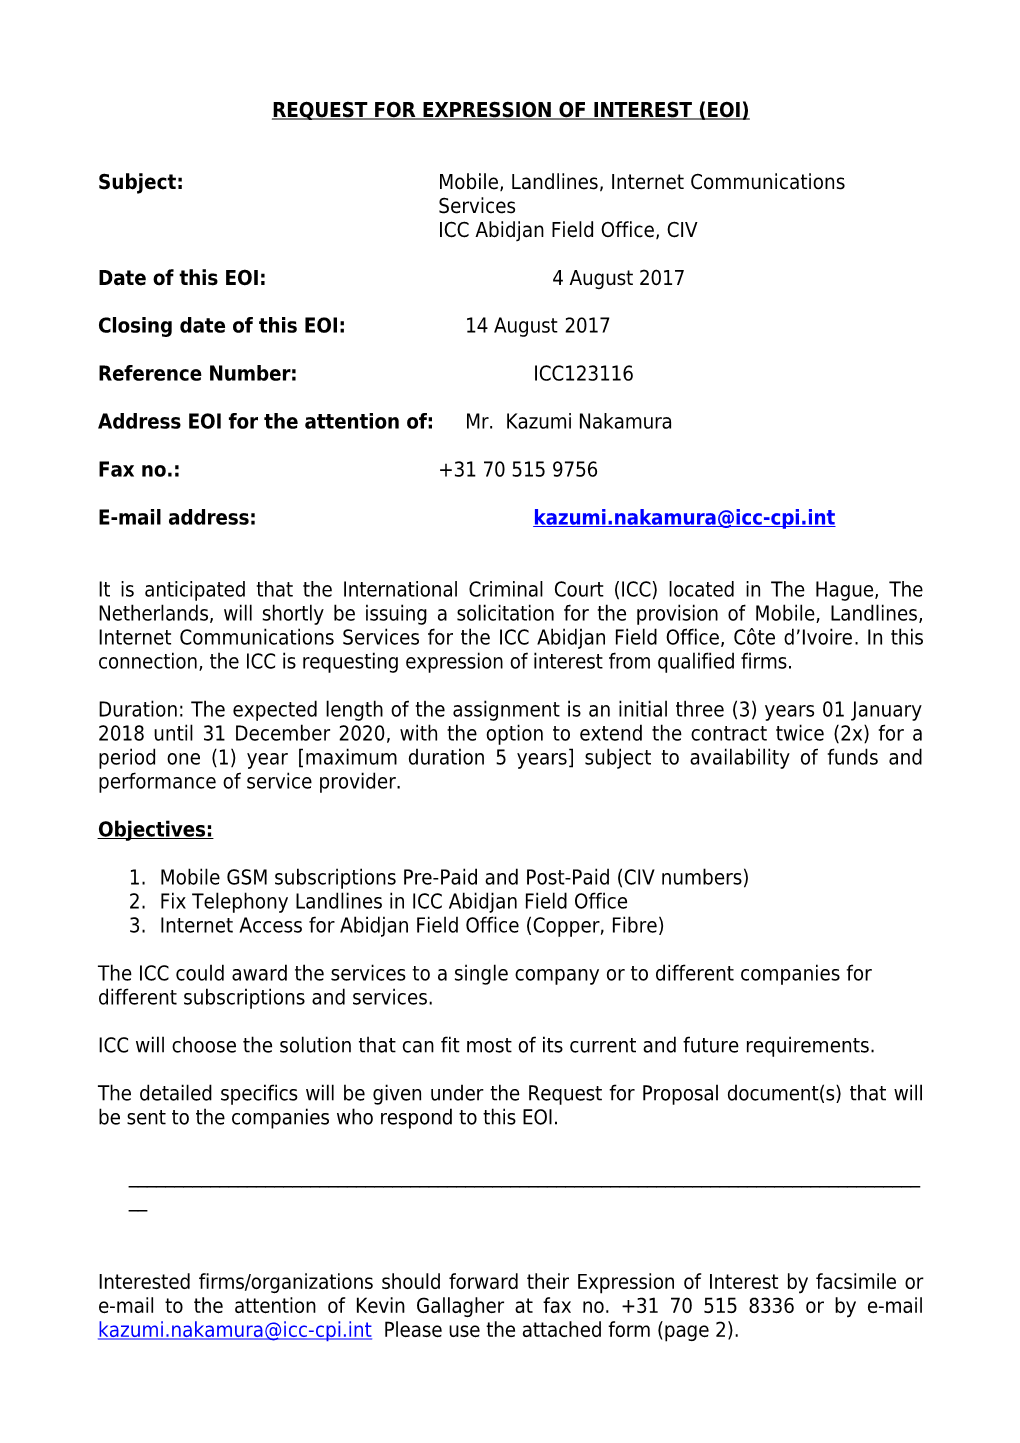 Request for Expression of Interest (Eoi) s5